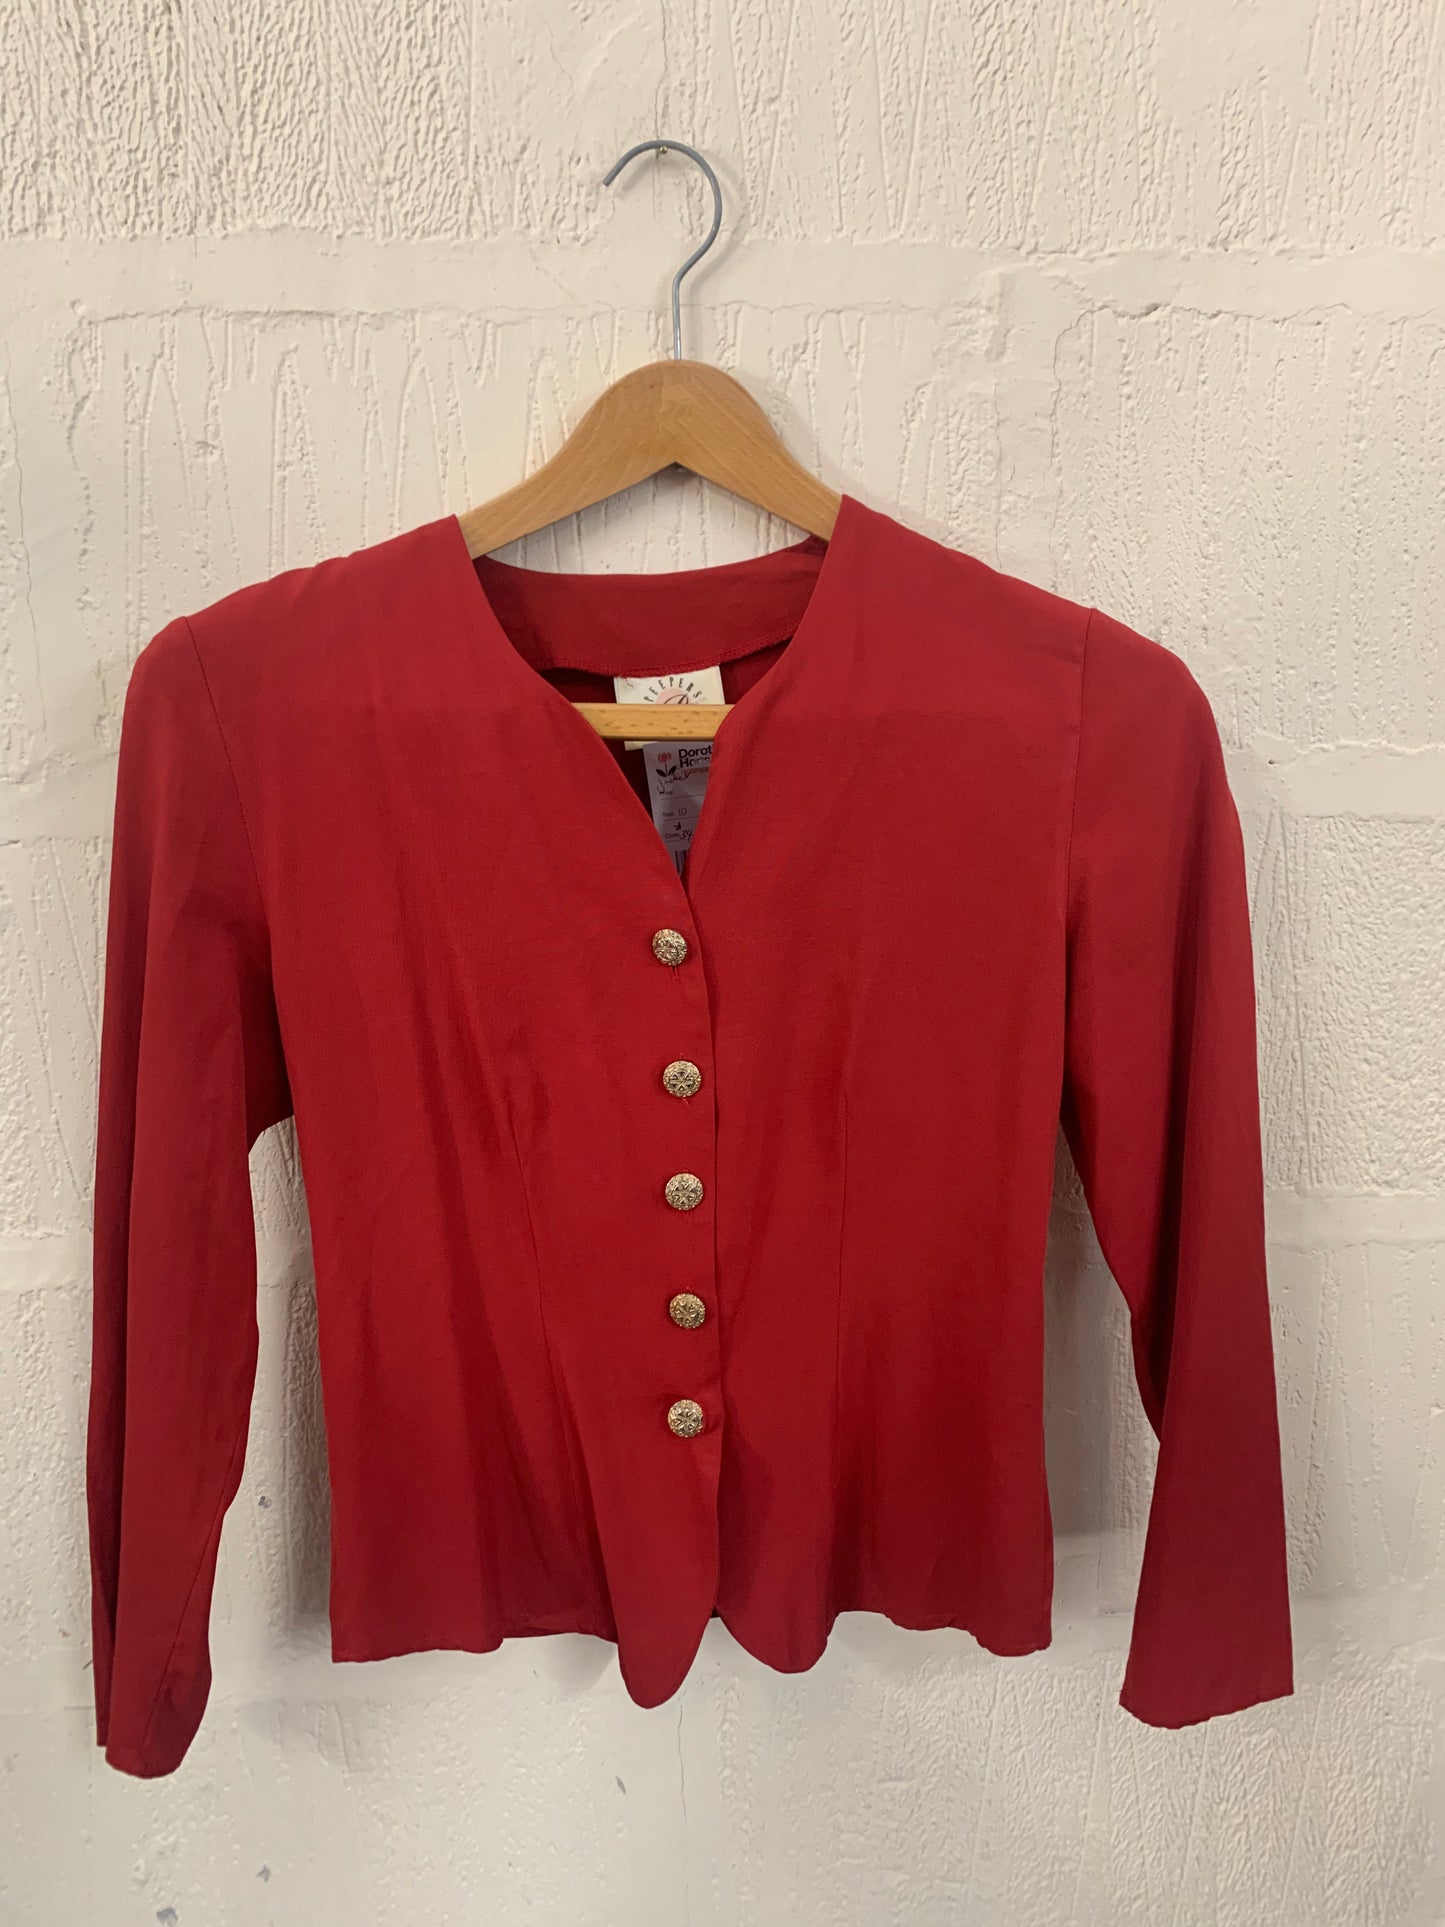 Vintage 1990s Red Light Weight Jacket Size 8